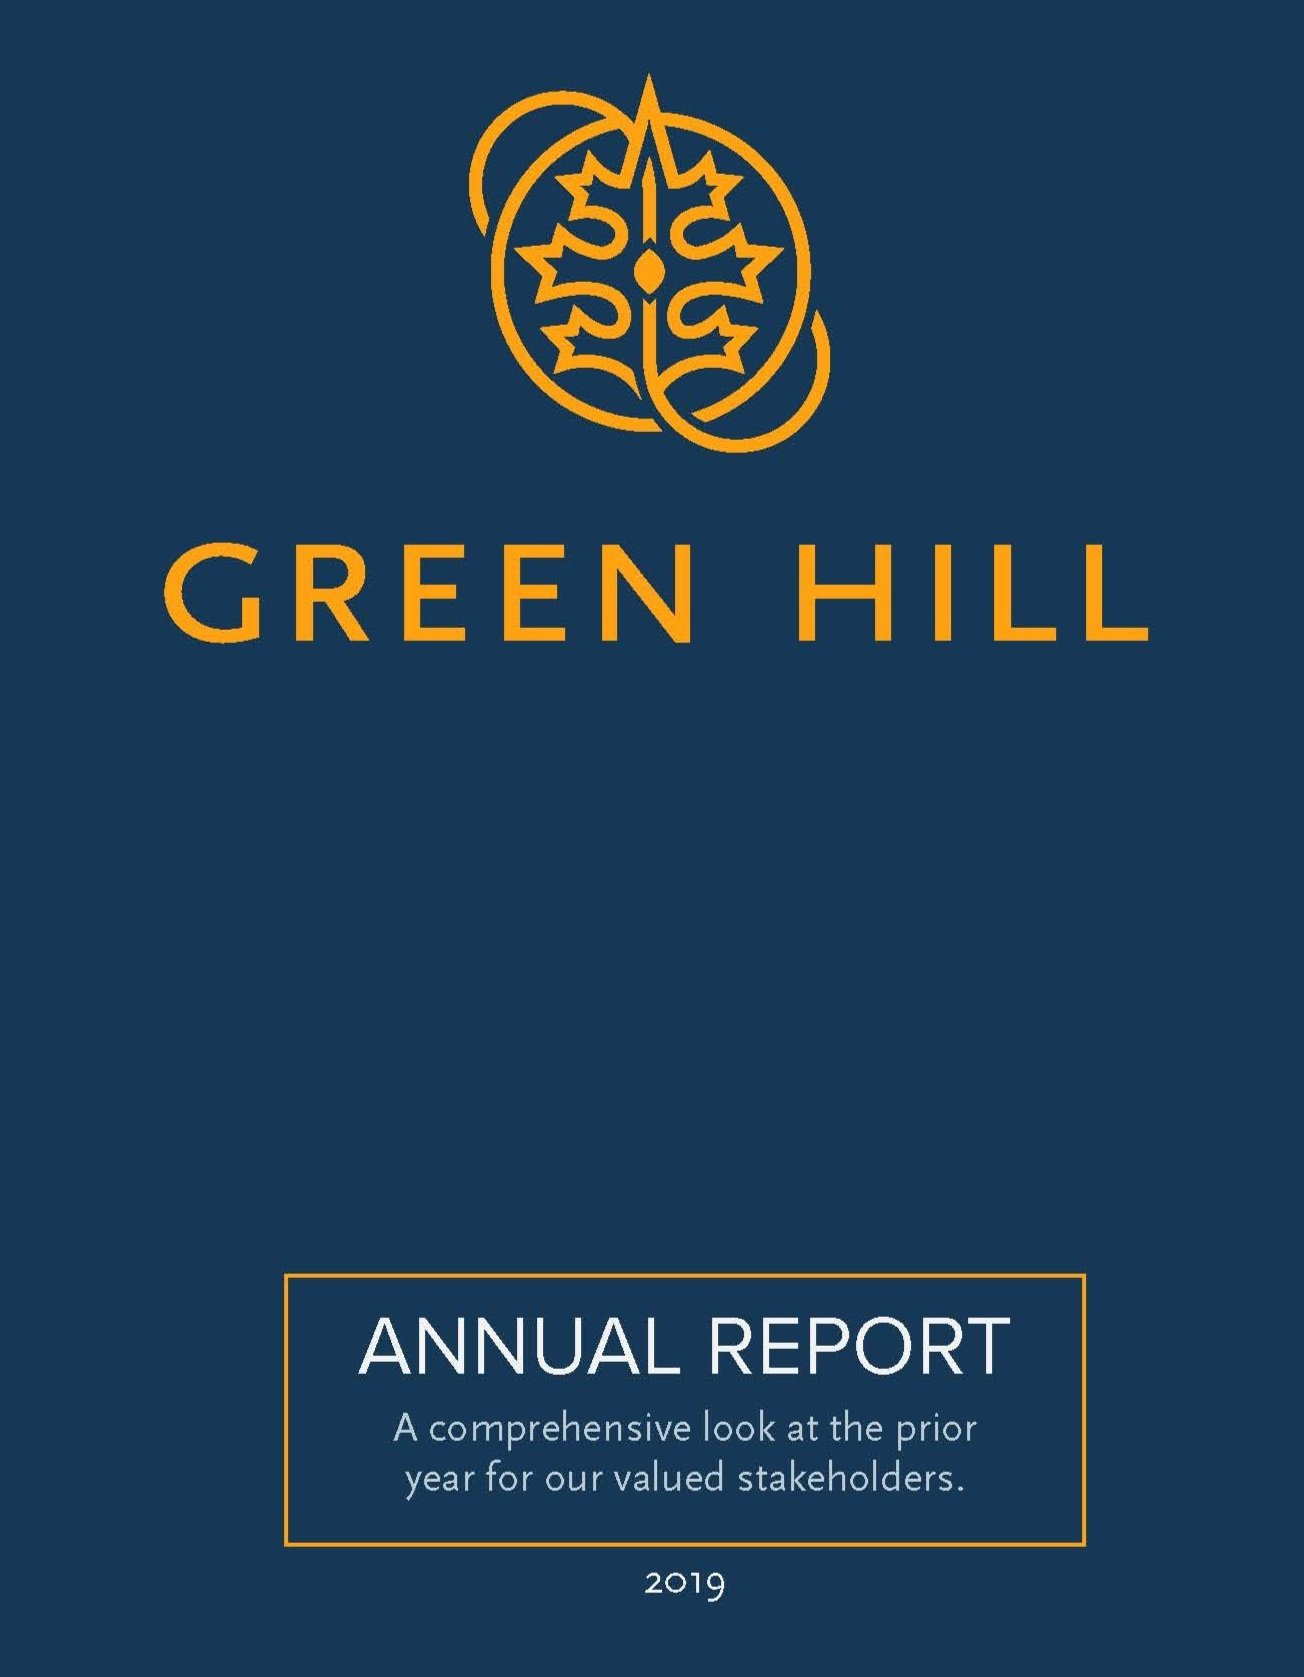  Check out the  Green Hill 2019 Annual Report / 2020 Strategic Plan  for (much) more information on the early days.  